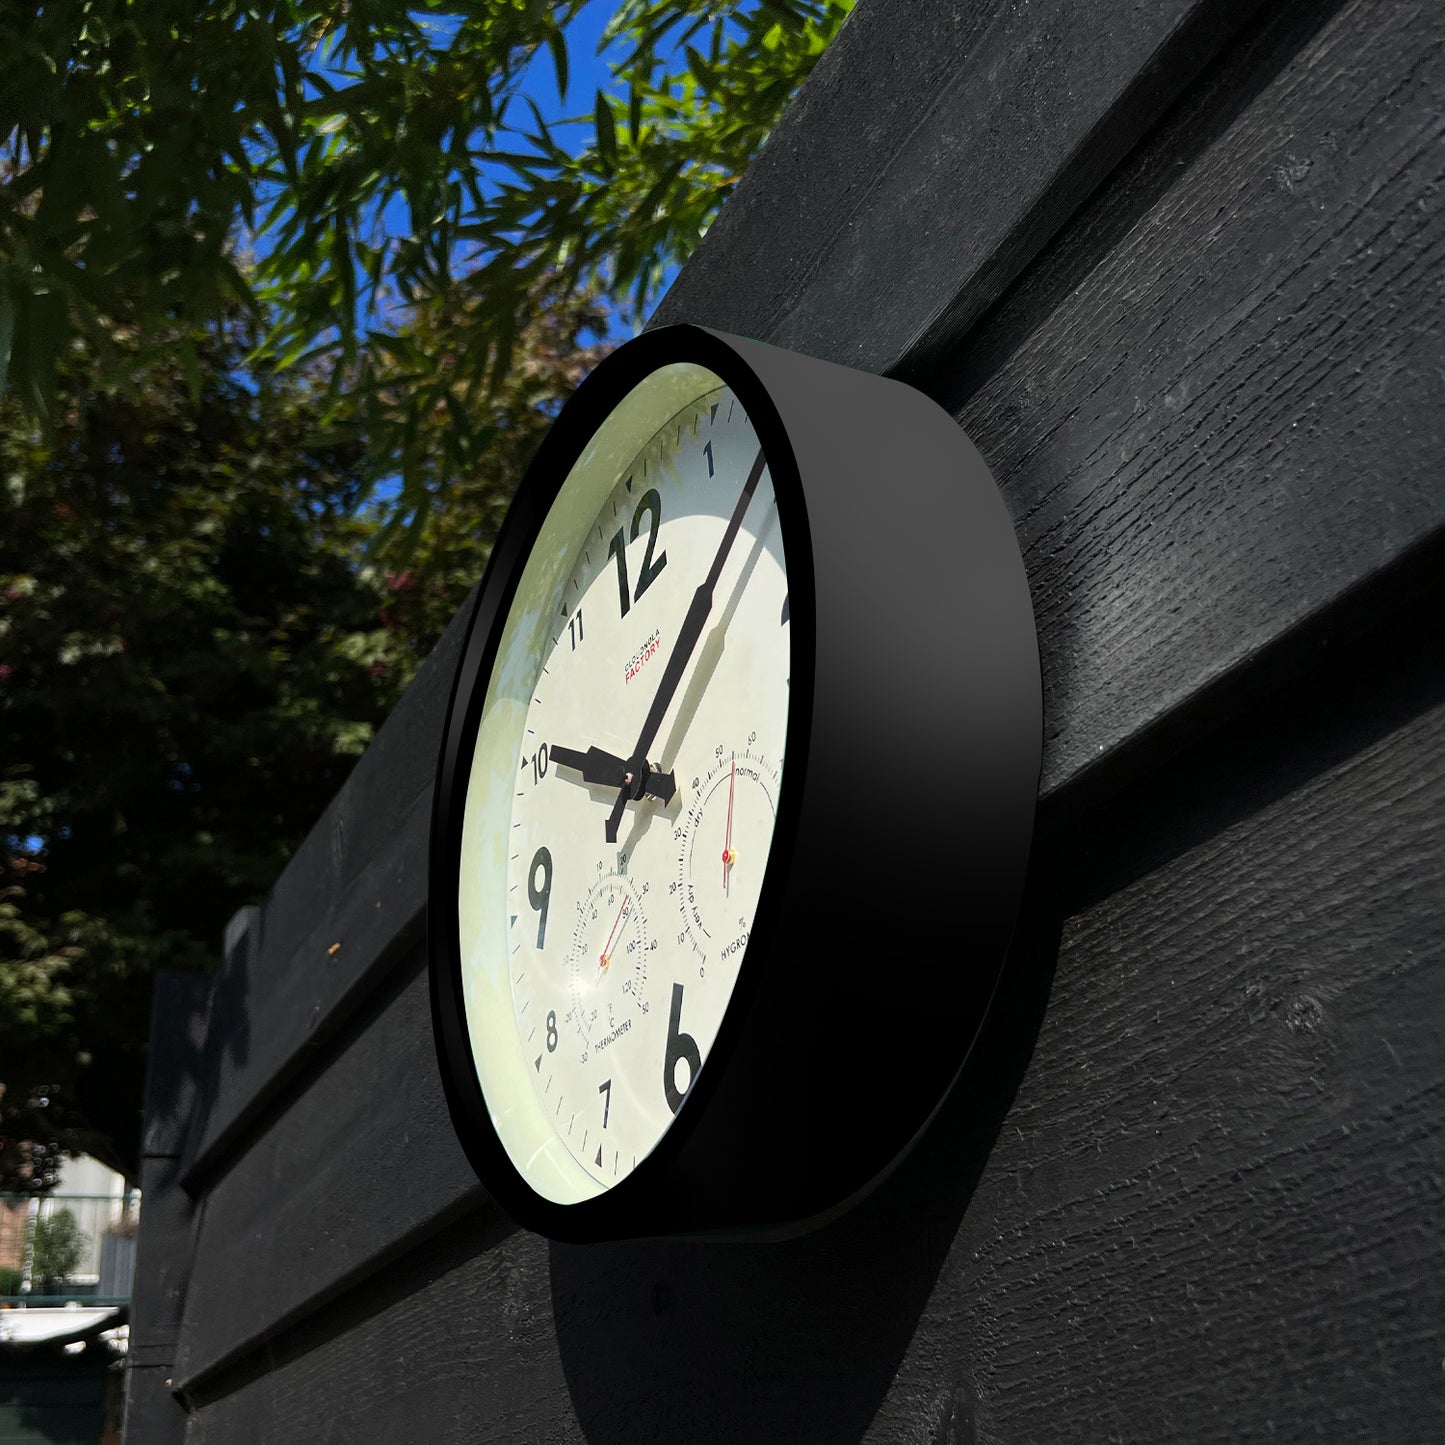 Factory Outdoor Black Wall Clock & Weather Station